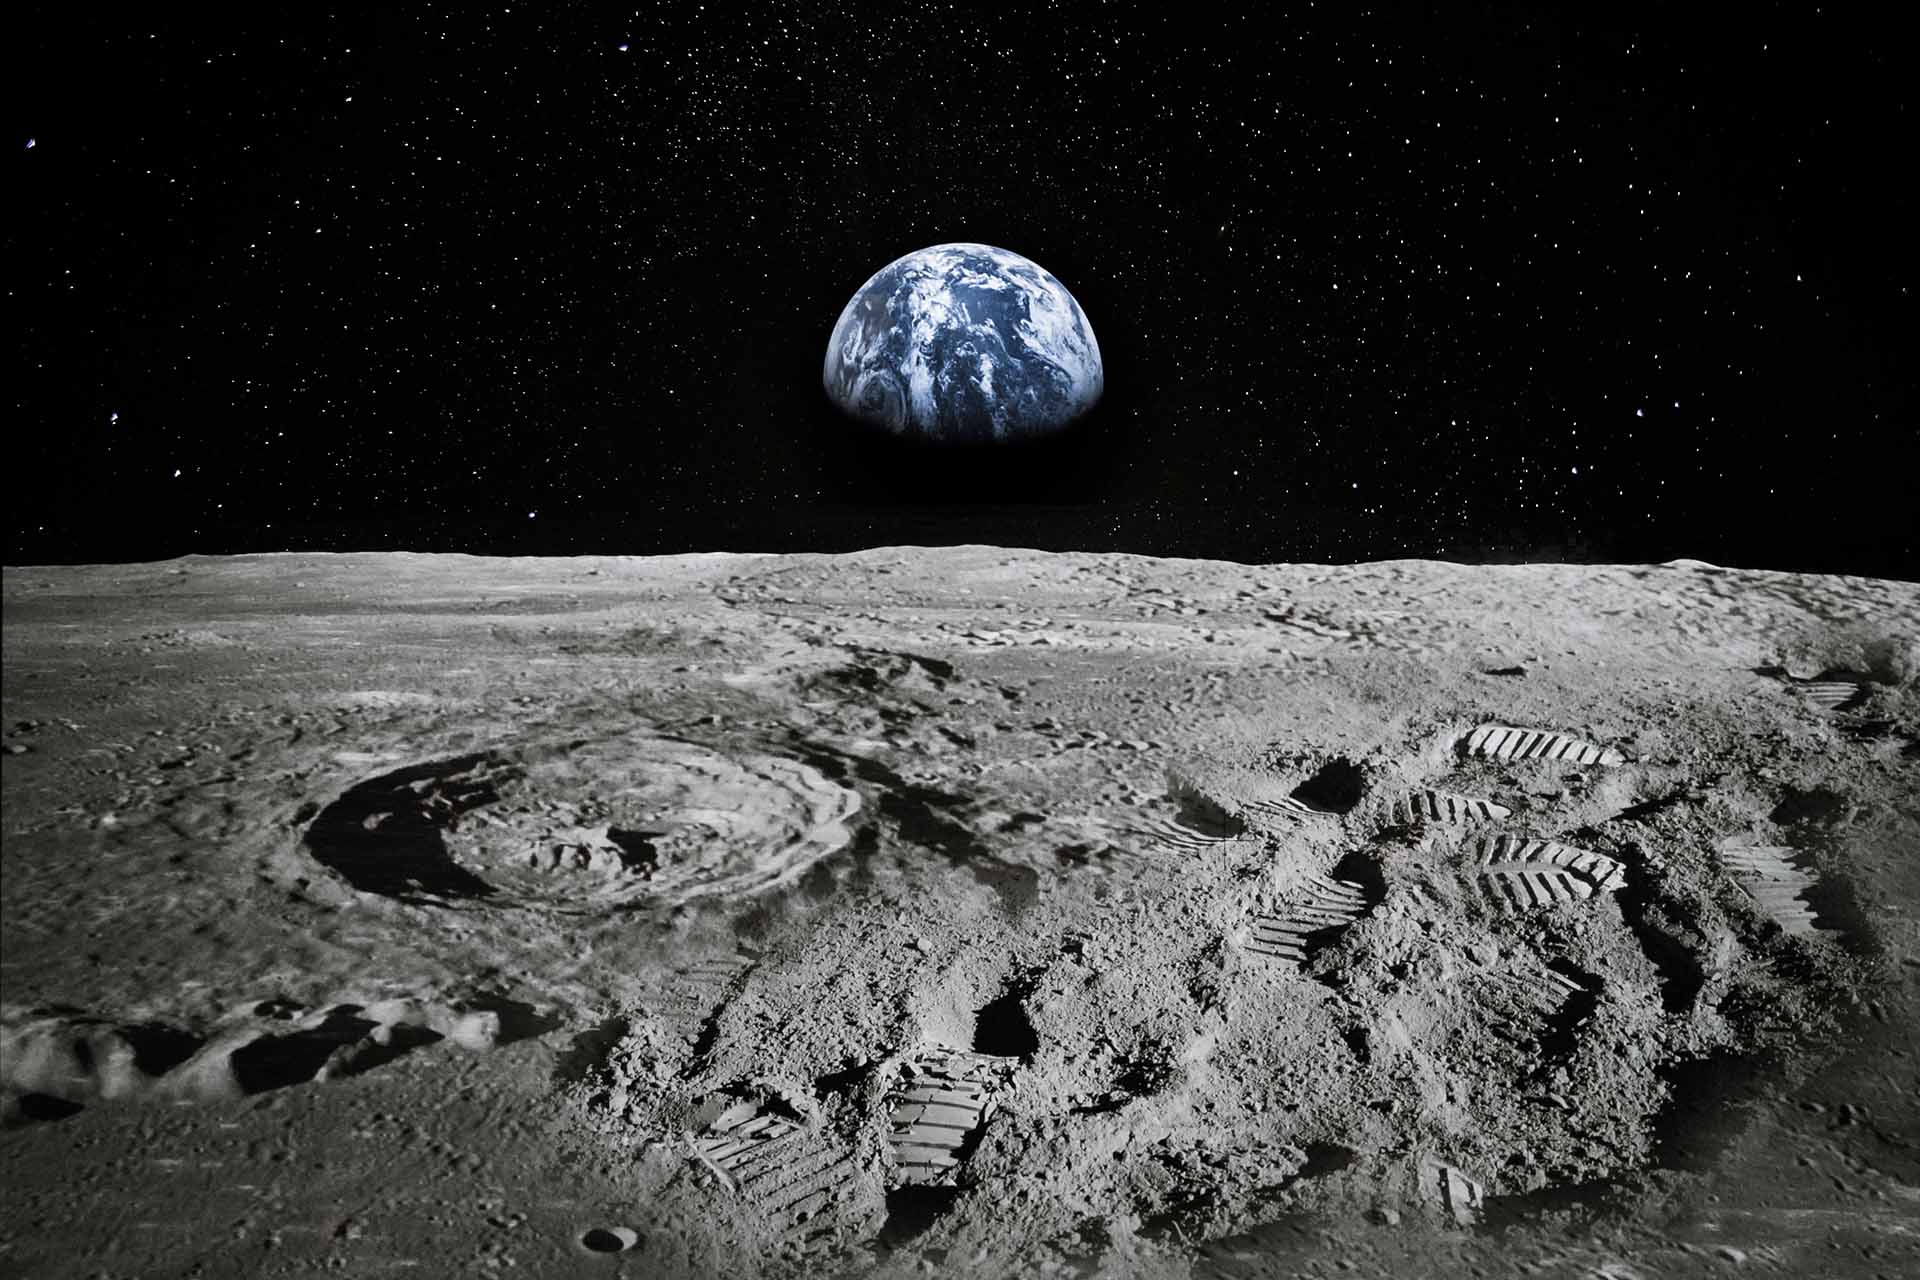 The Earth rises into the horizon in space as viewed from the surface of the Moon.